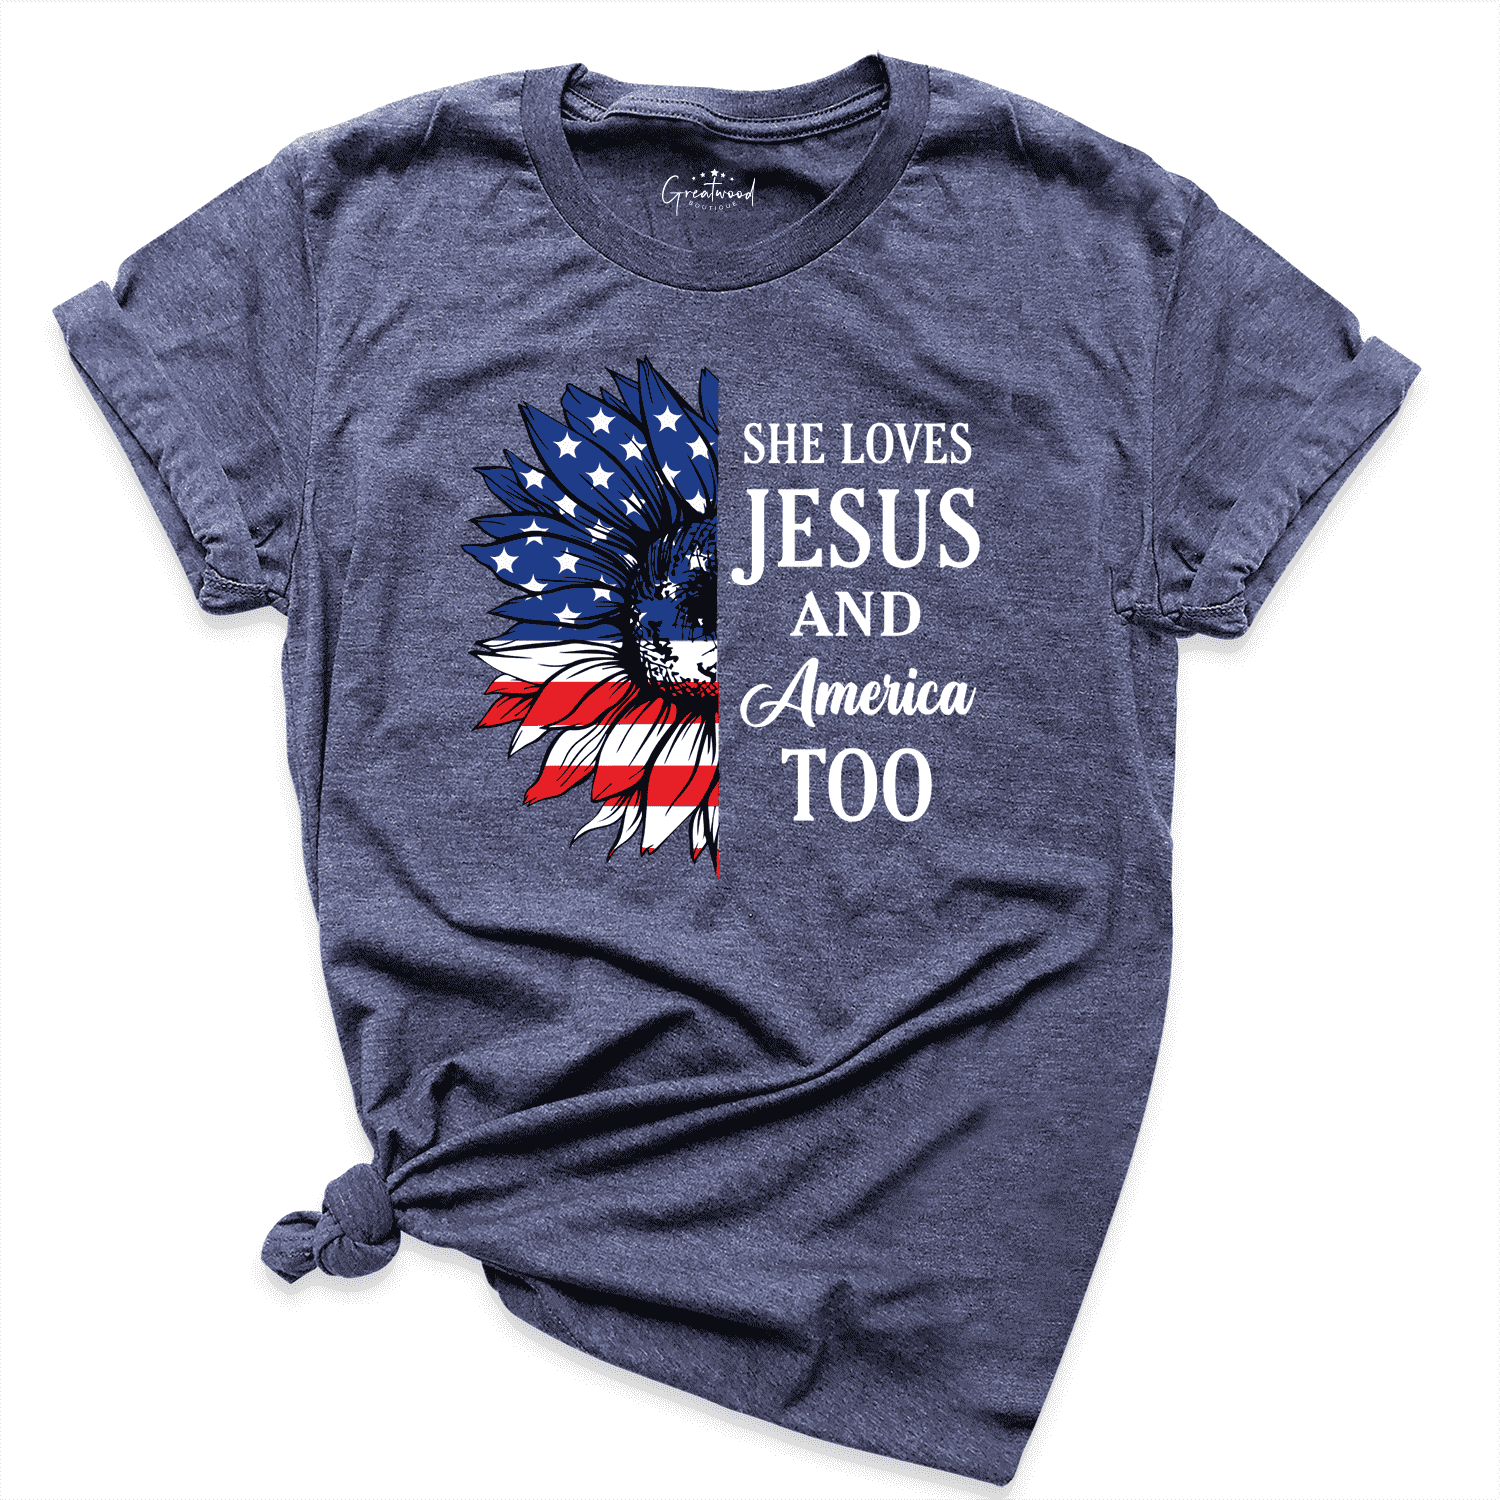 She Loves Jesus And American Too Shirt Navy - Greatwood Boutique